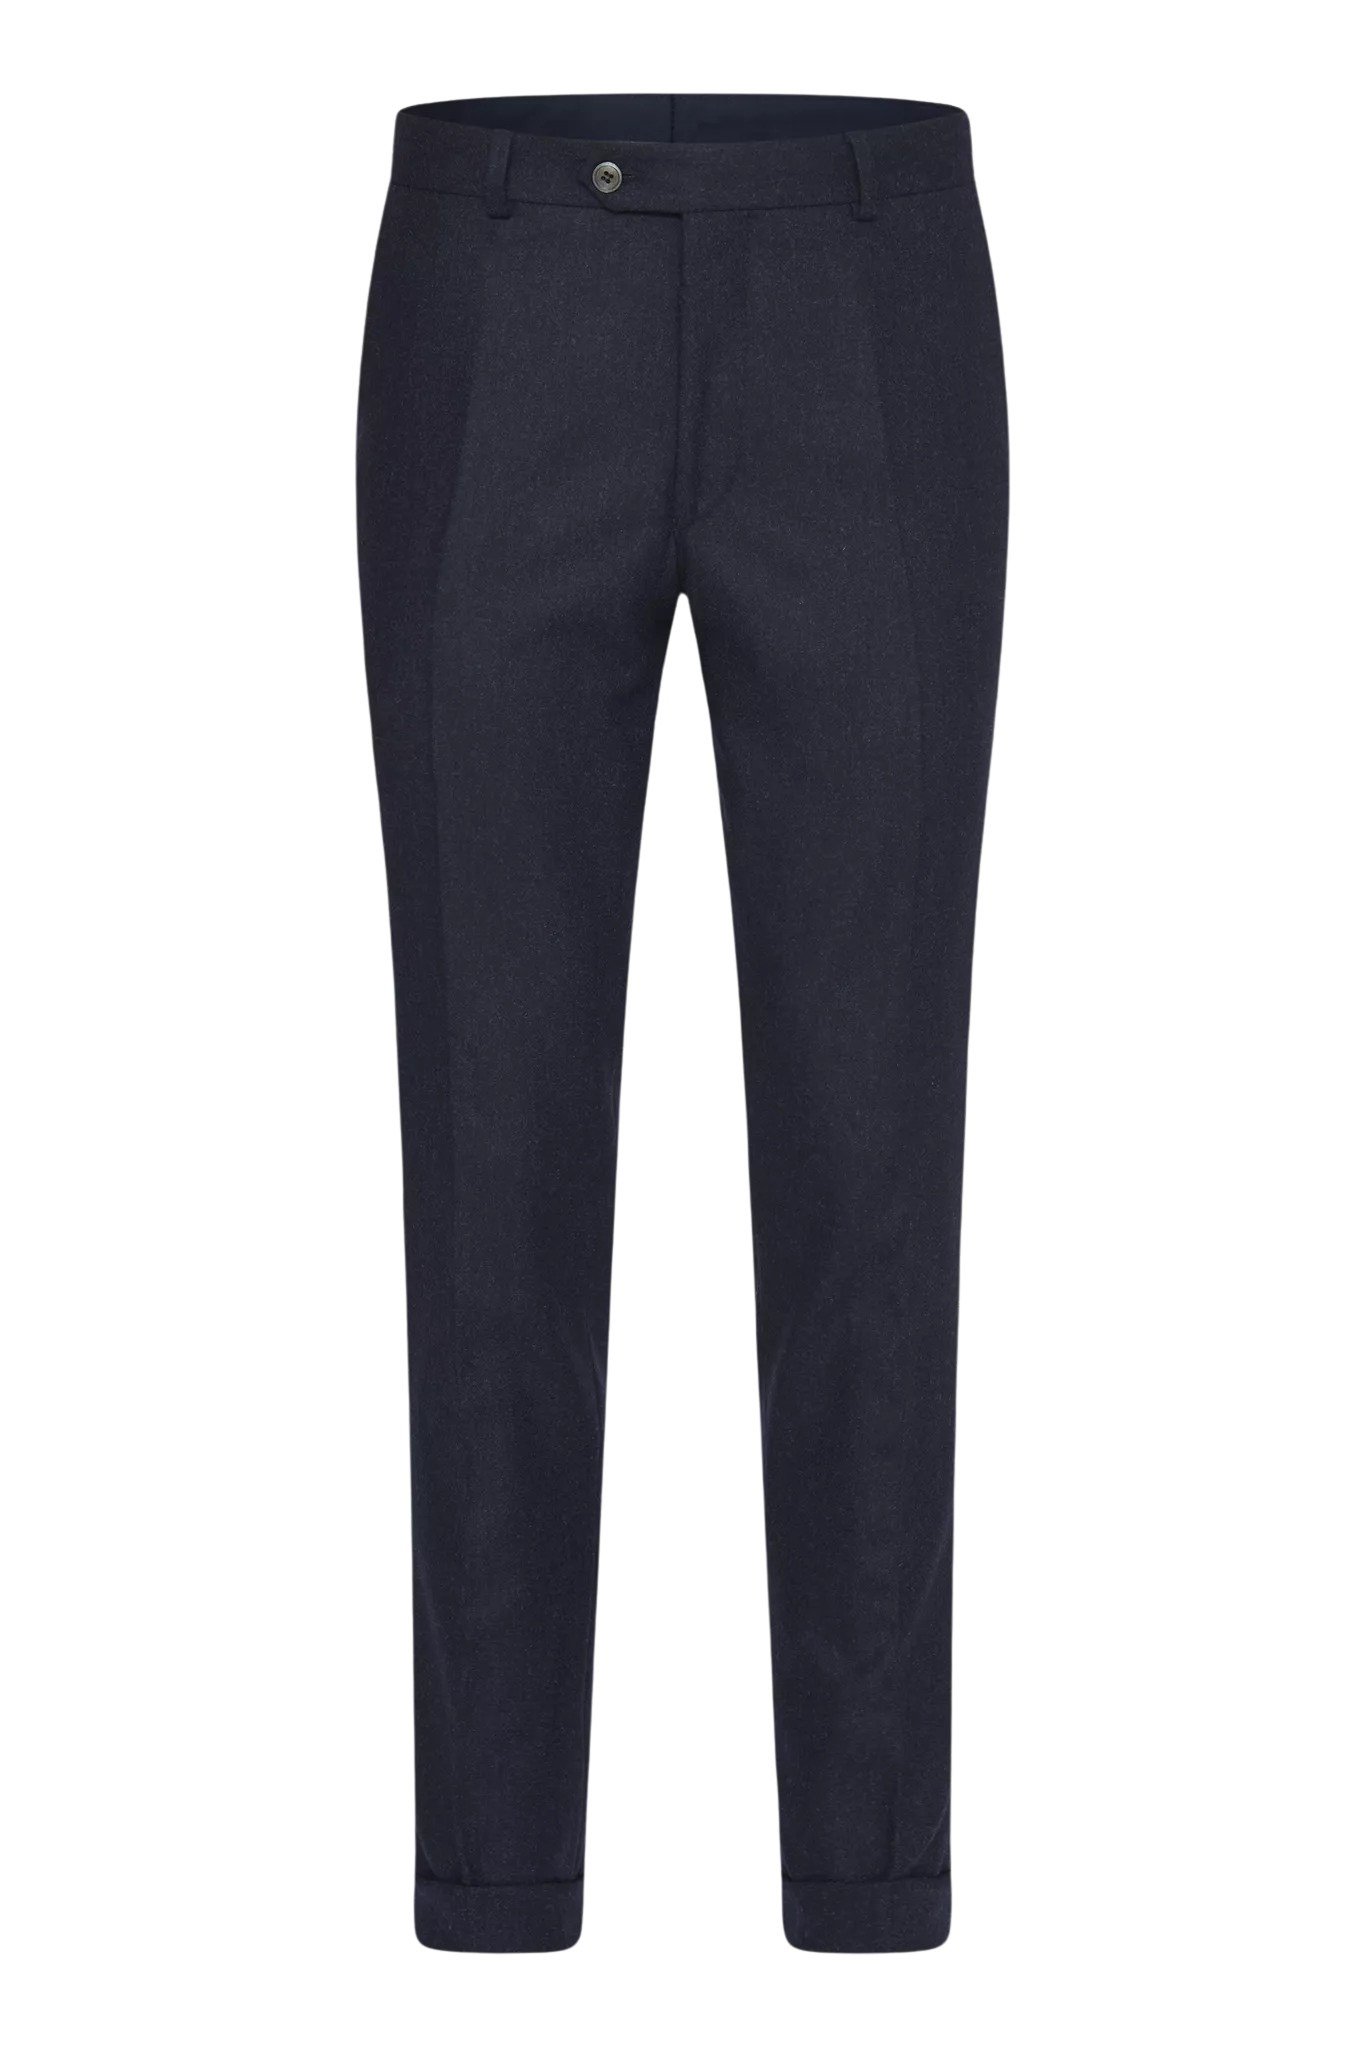 oscar-jacobson_denz-turn-up-trousers_midnight-blue_53905385_226_front